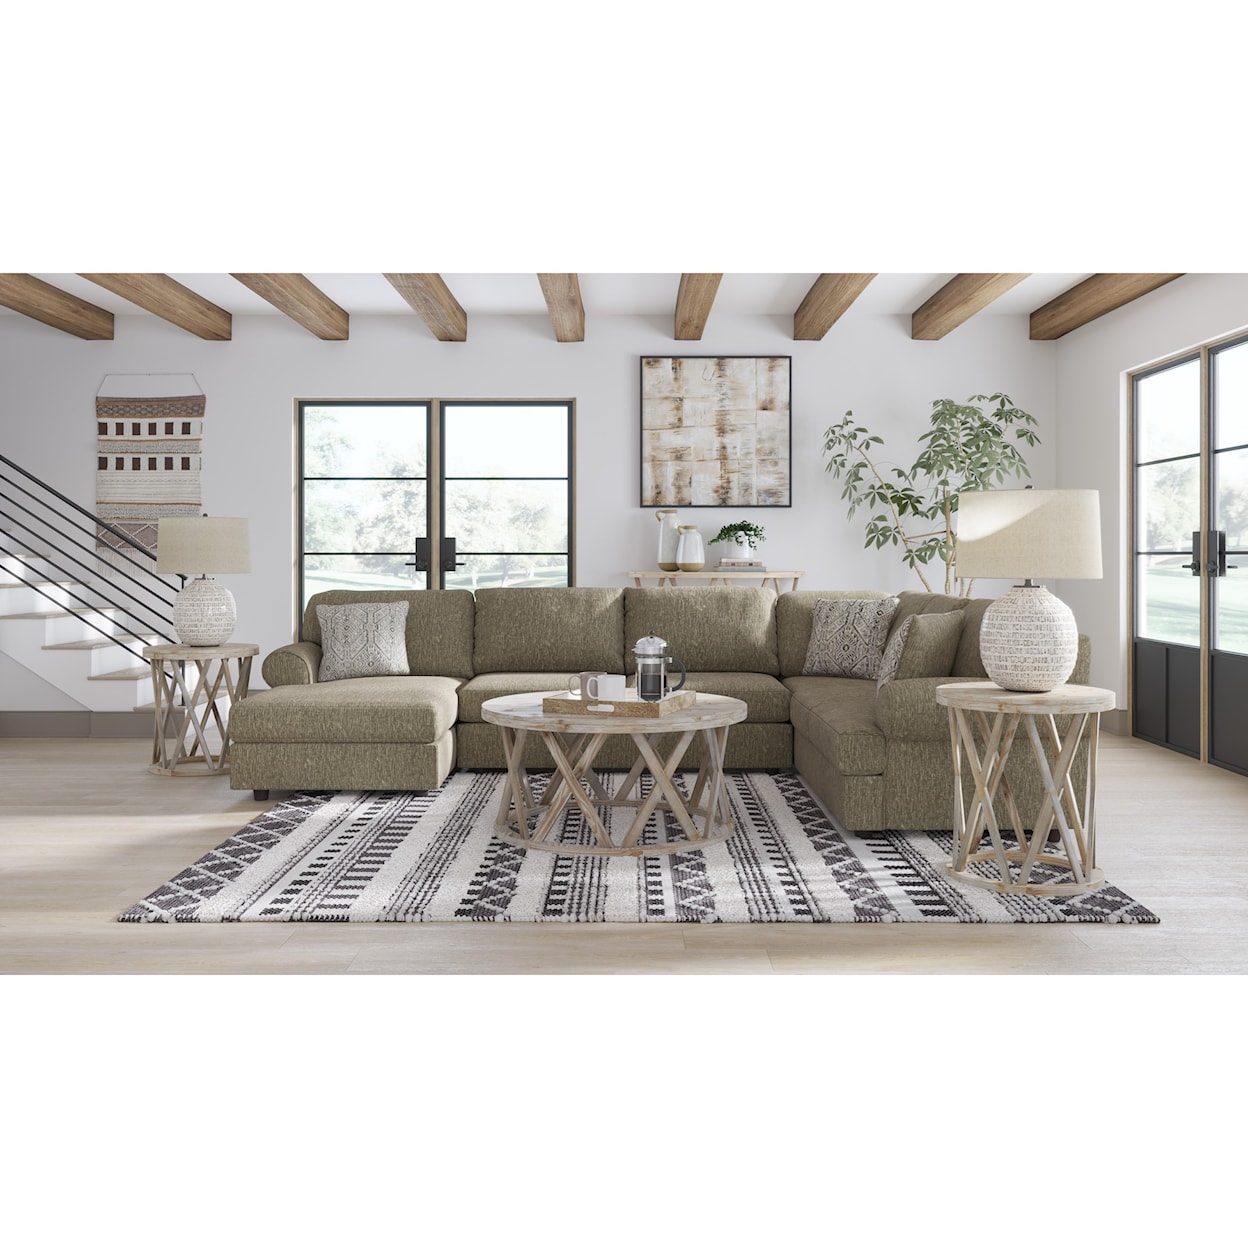 Ashley Furniture Signature Design Hoylake 3-Piece Sectional with Chaise